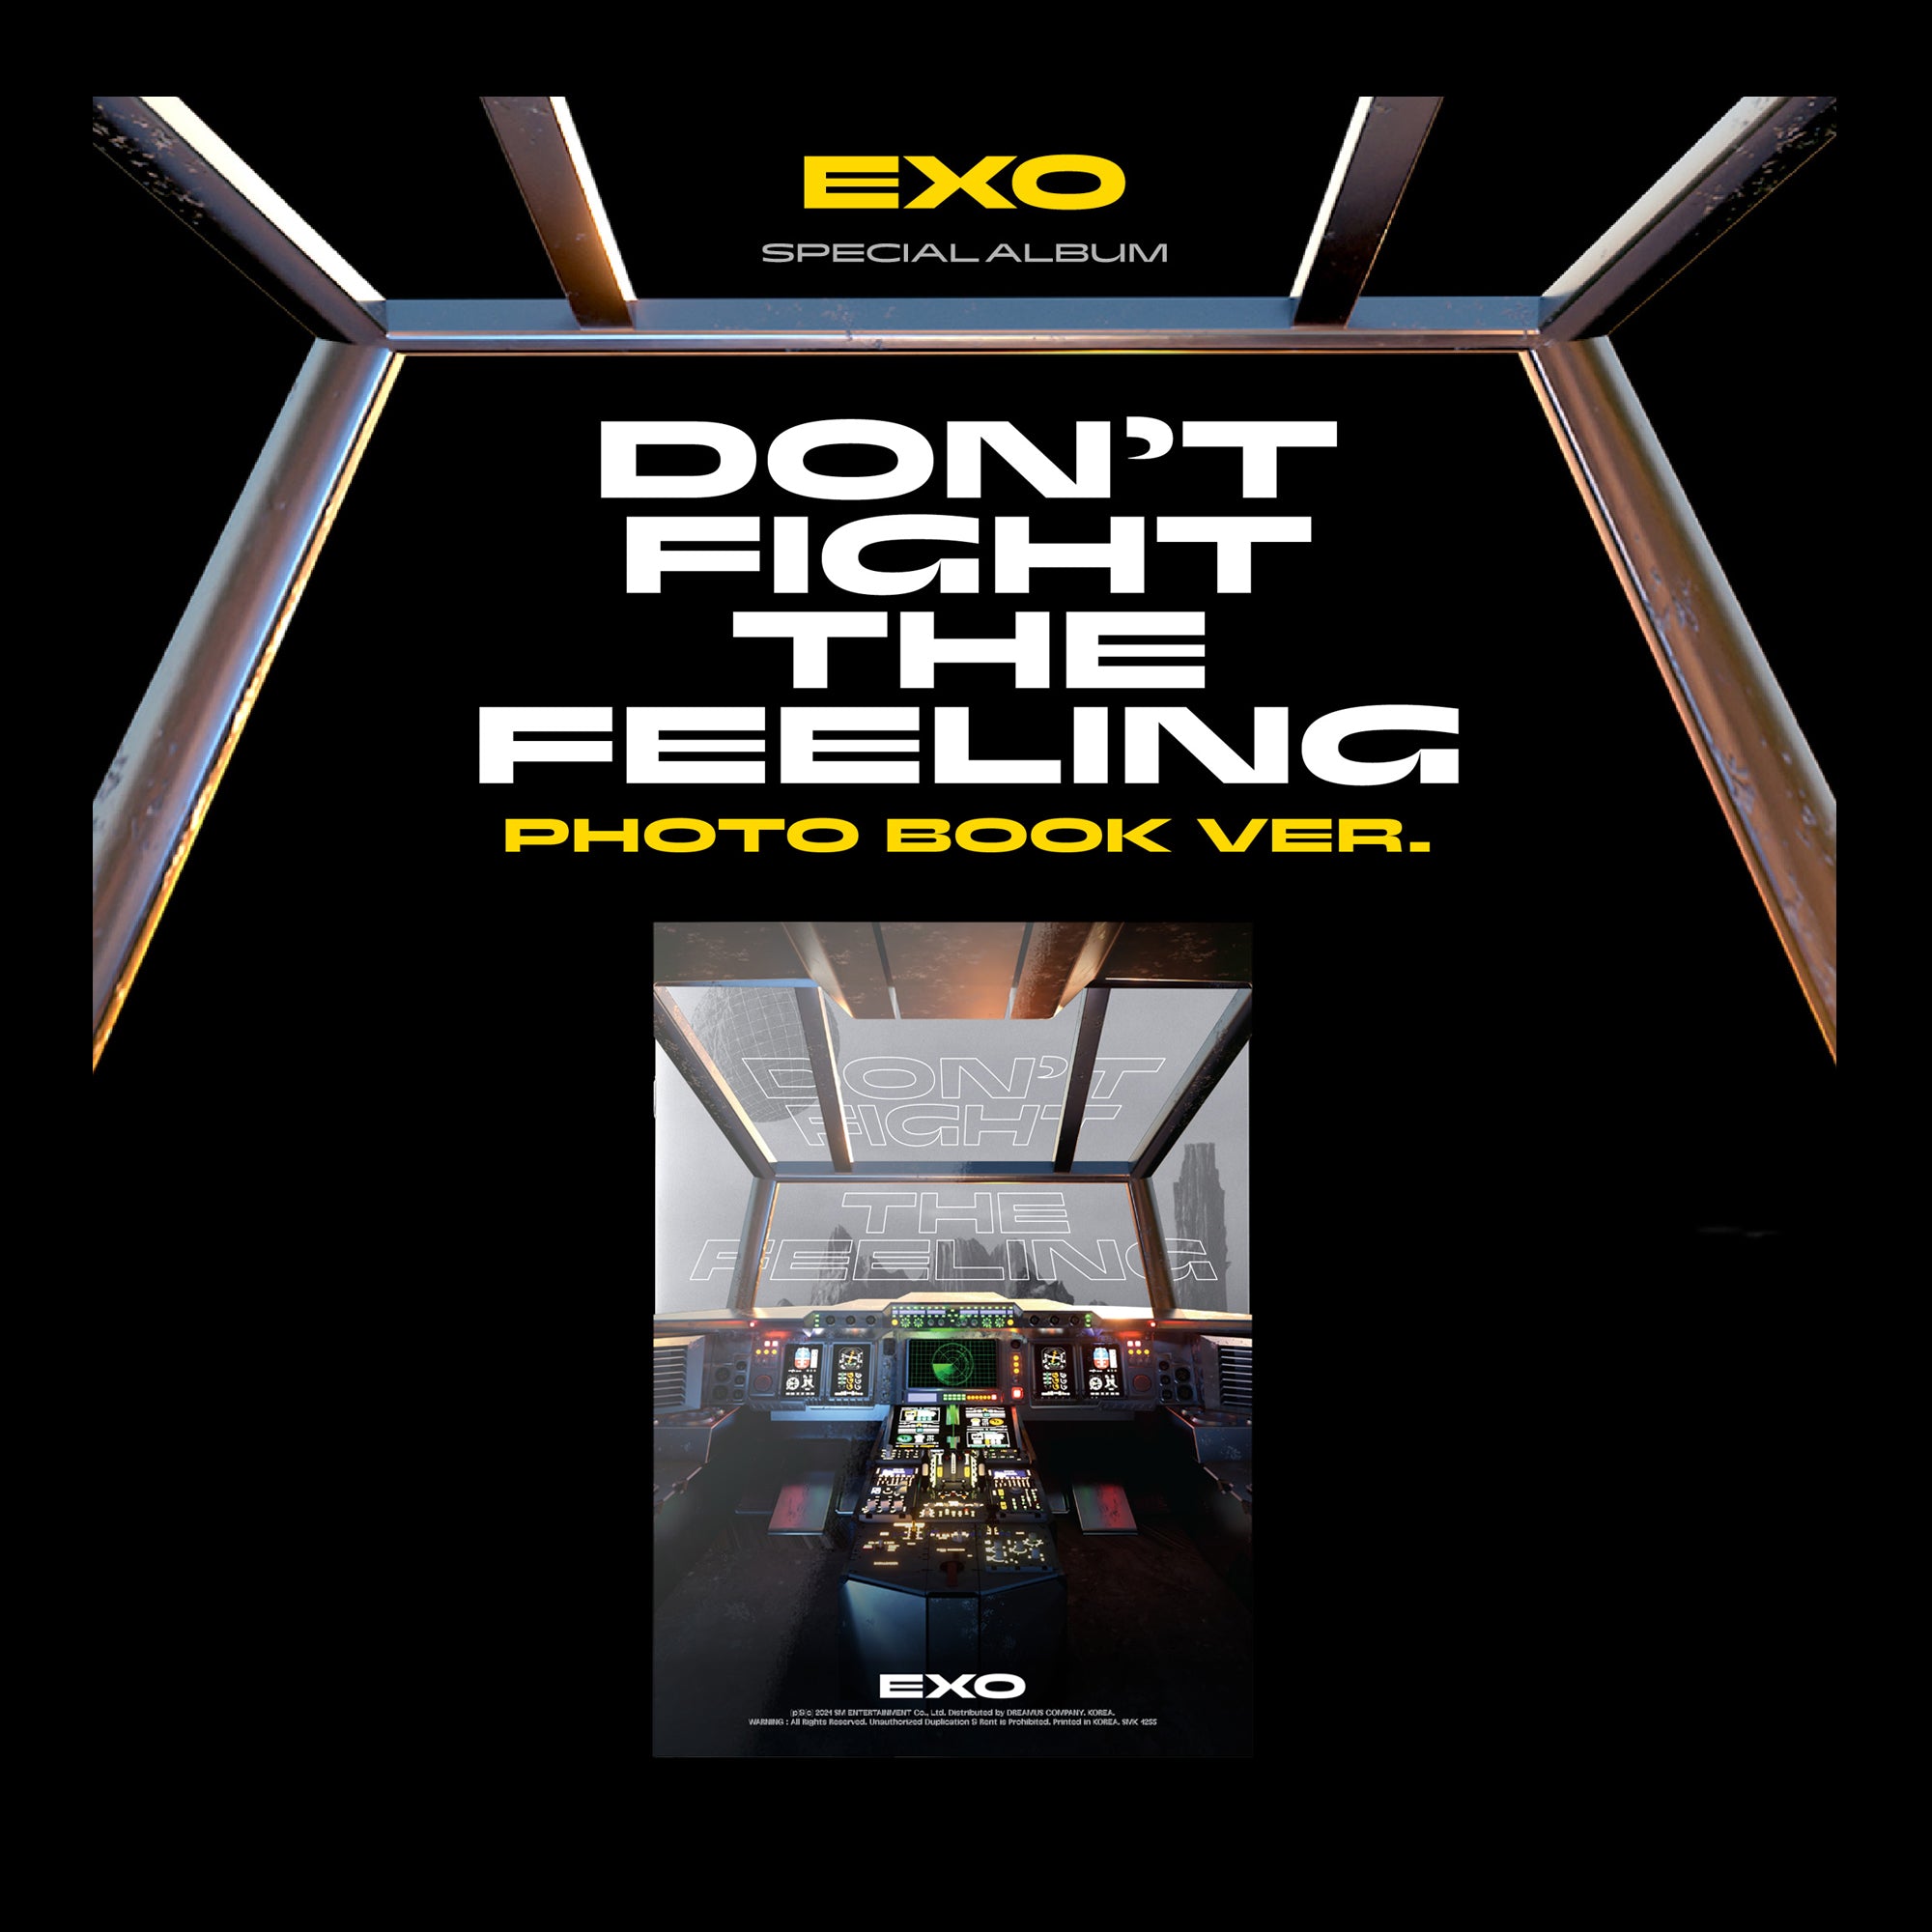 EXO - Don’t fight the feeling (Photo book 1 Ver.)